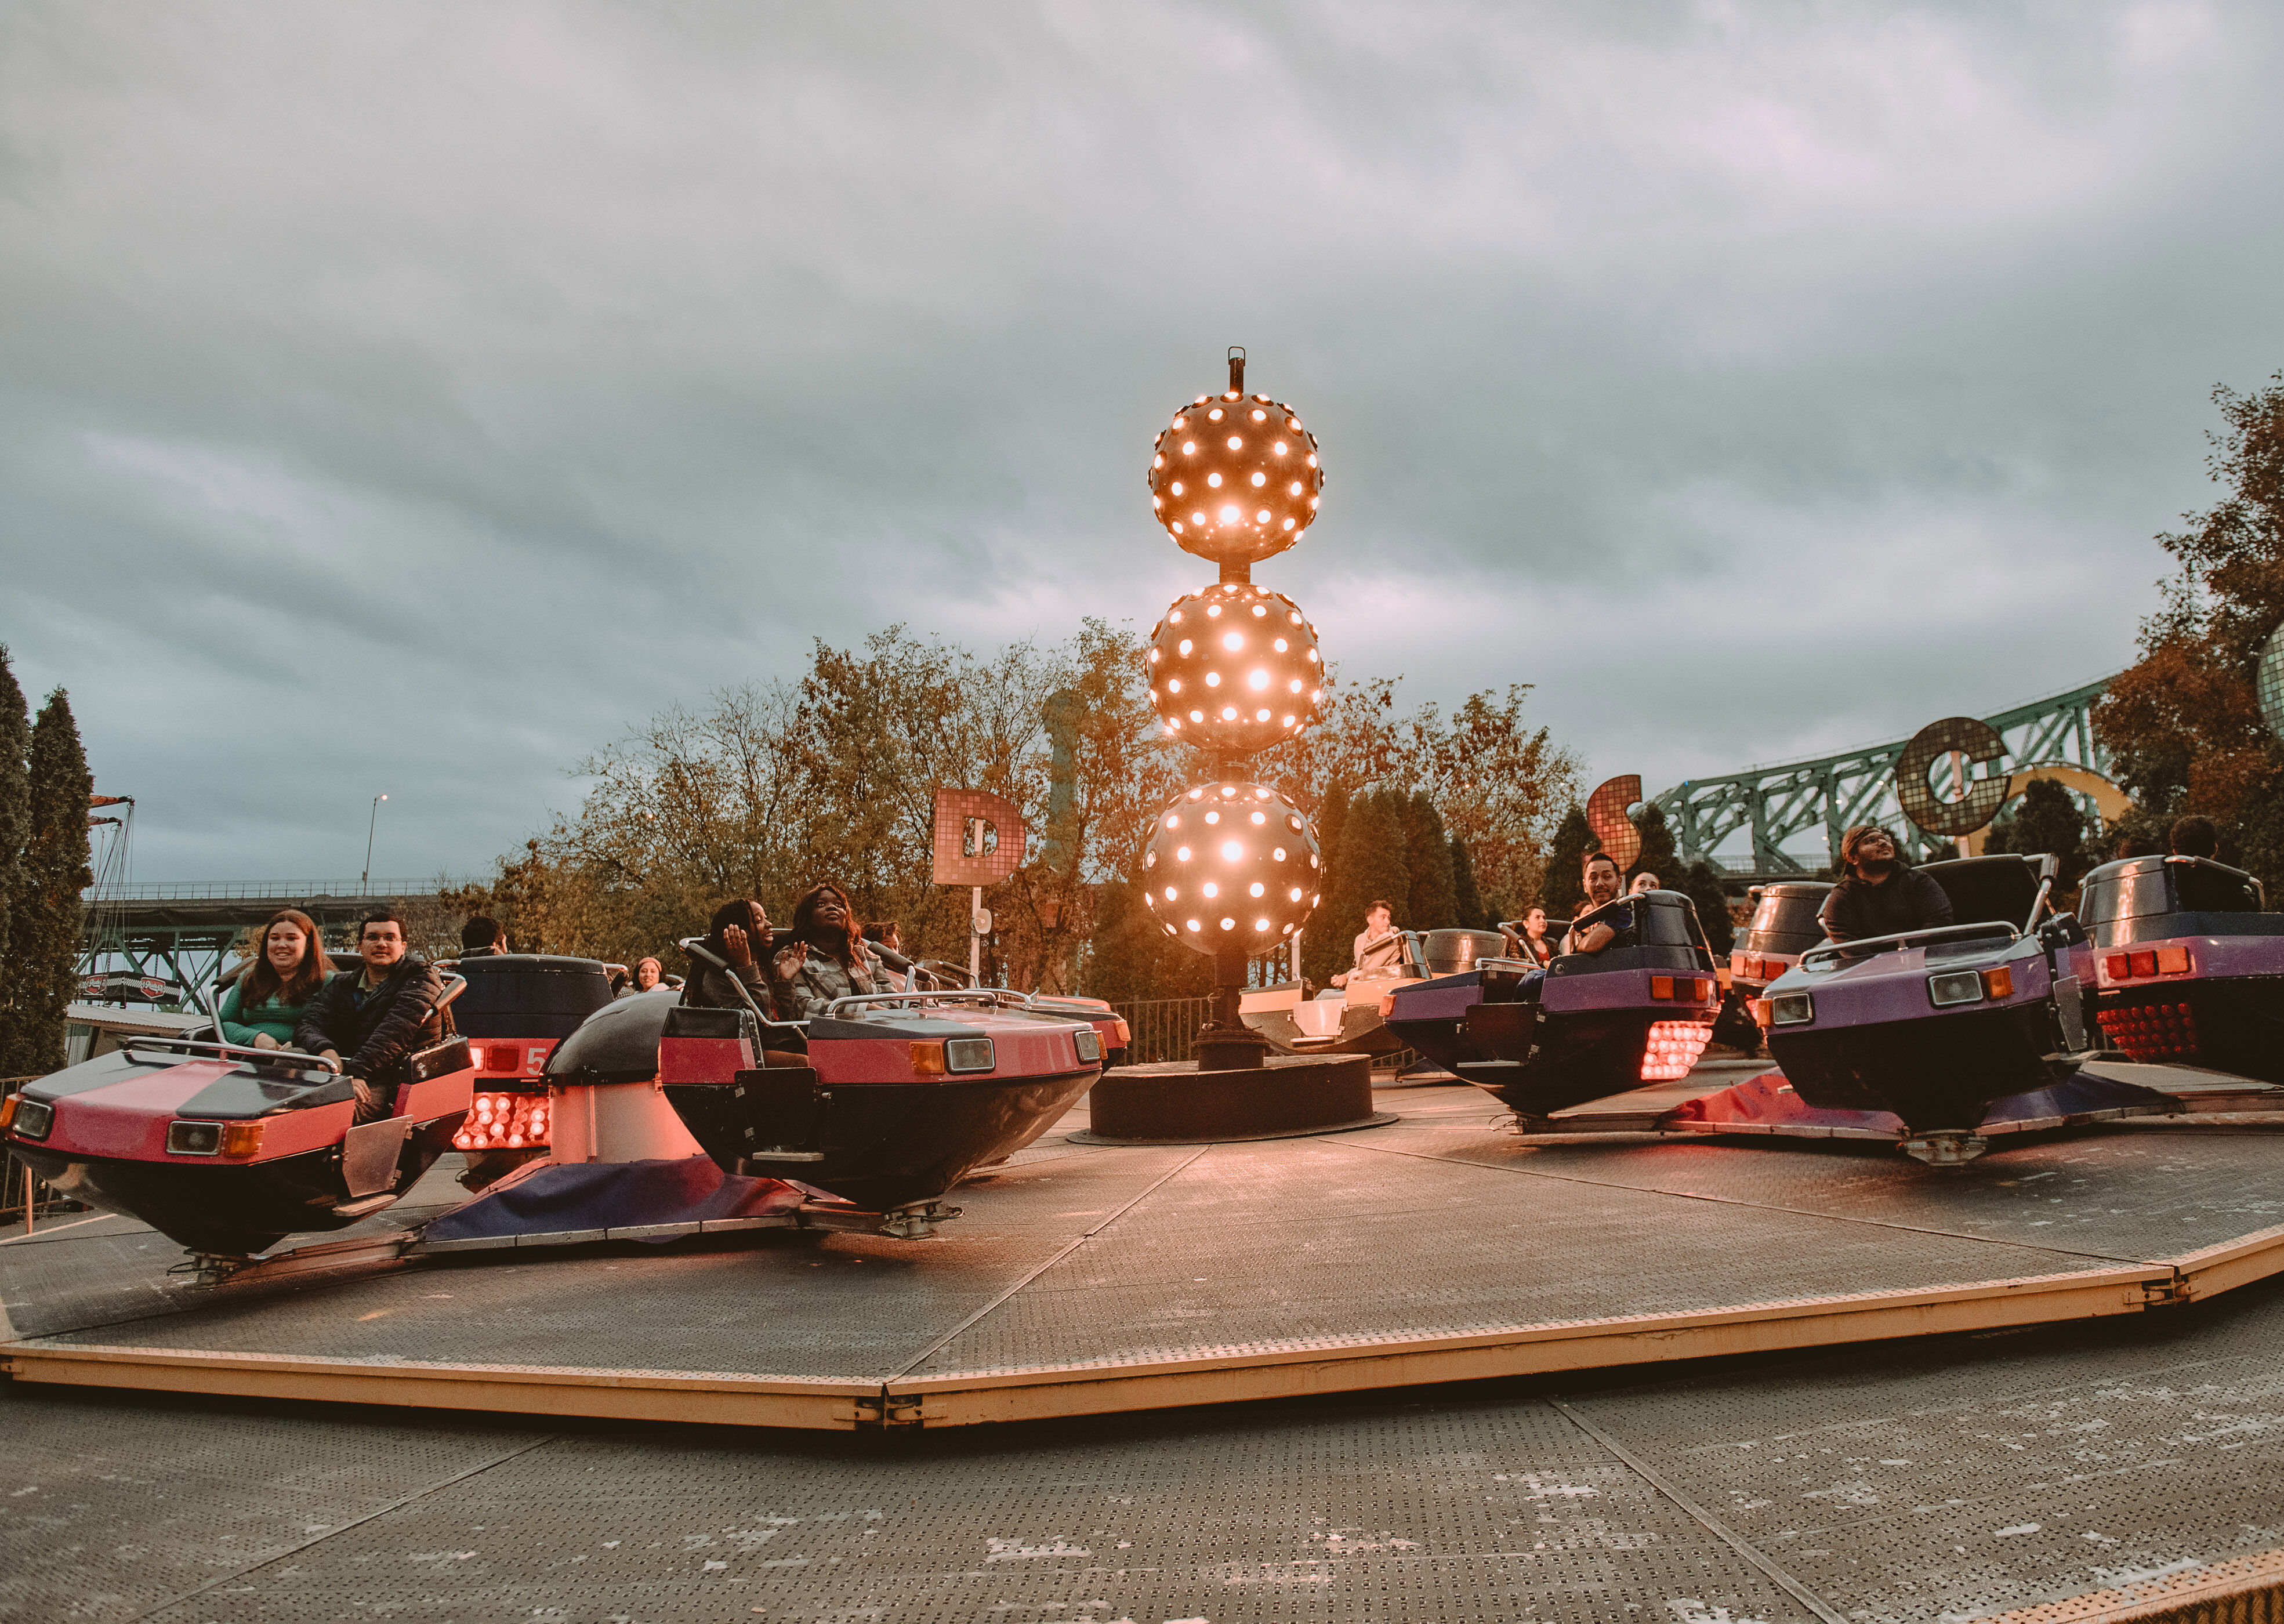 Visitors enjoy a bumper car attraction at dusk, with illuminated spherical lights and a backdrop of trees and a roller coaster.